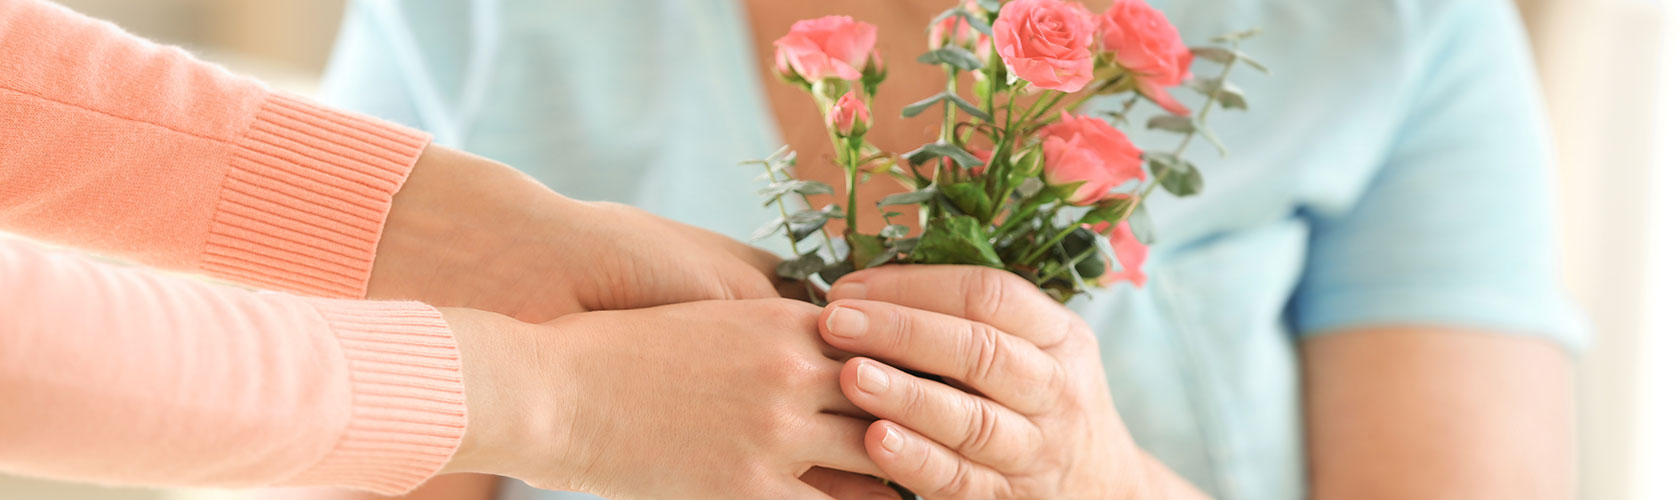 hands holding flowers